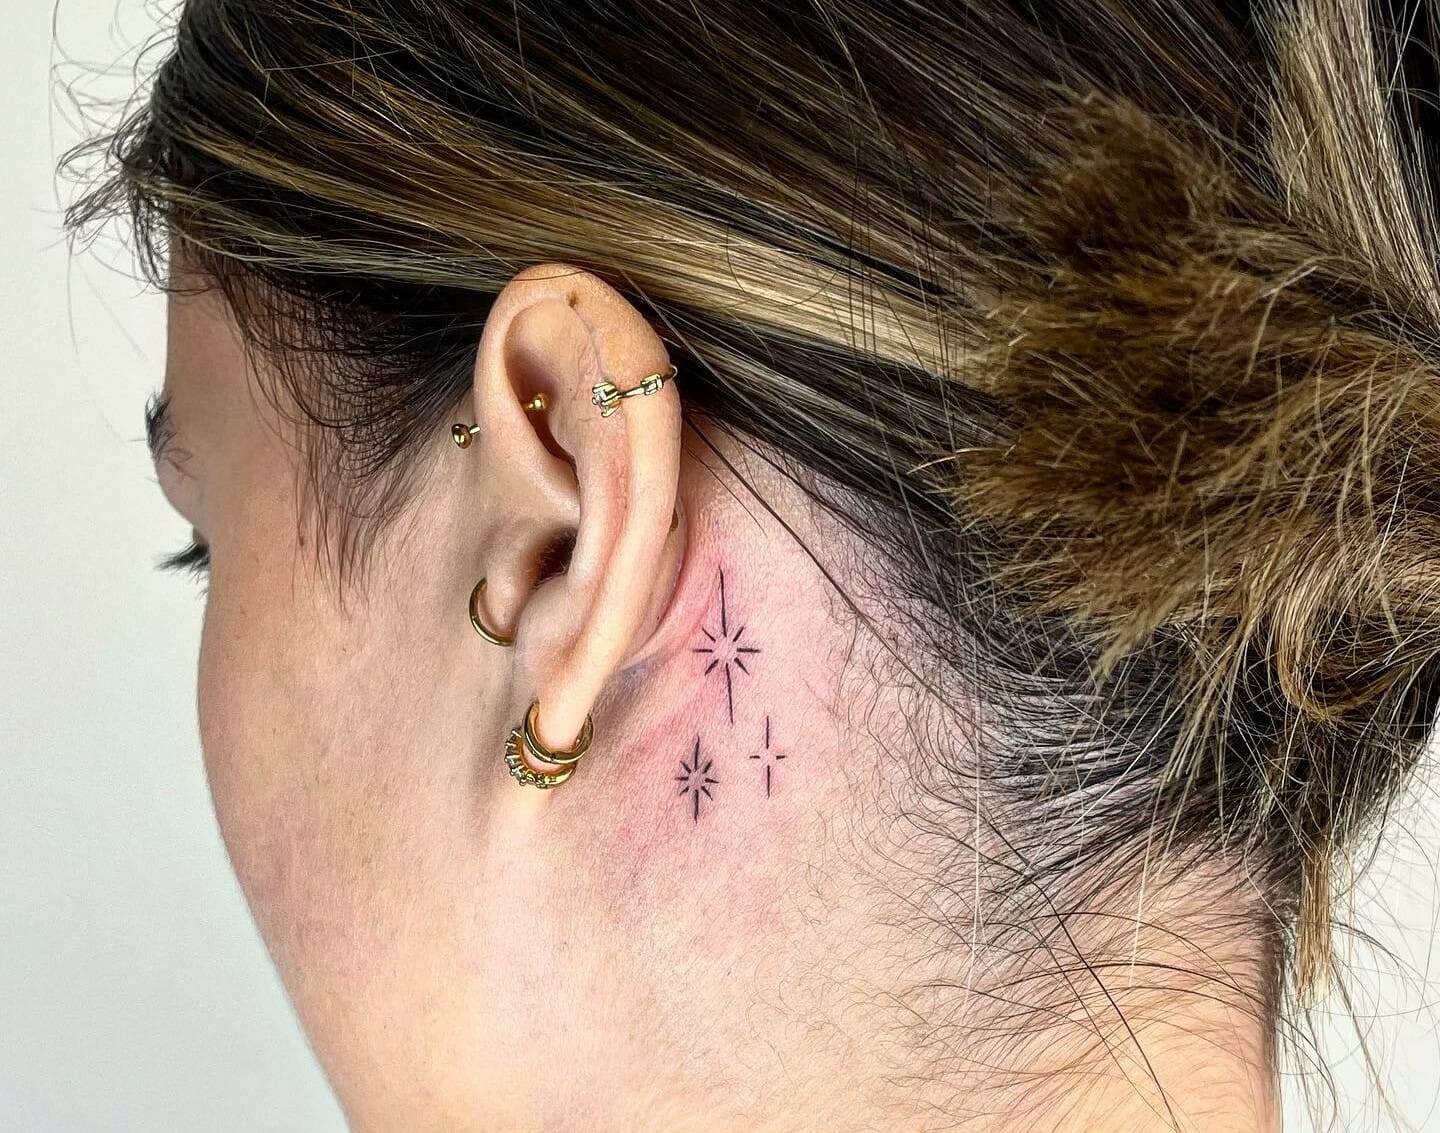 12 Star Tattoo Behind Ears Ideas To Inspire You  alexie